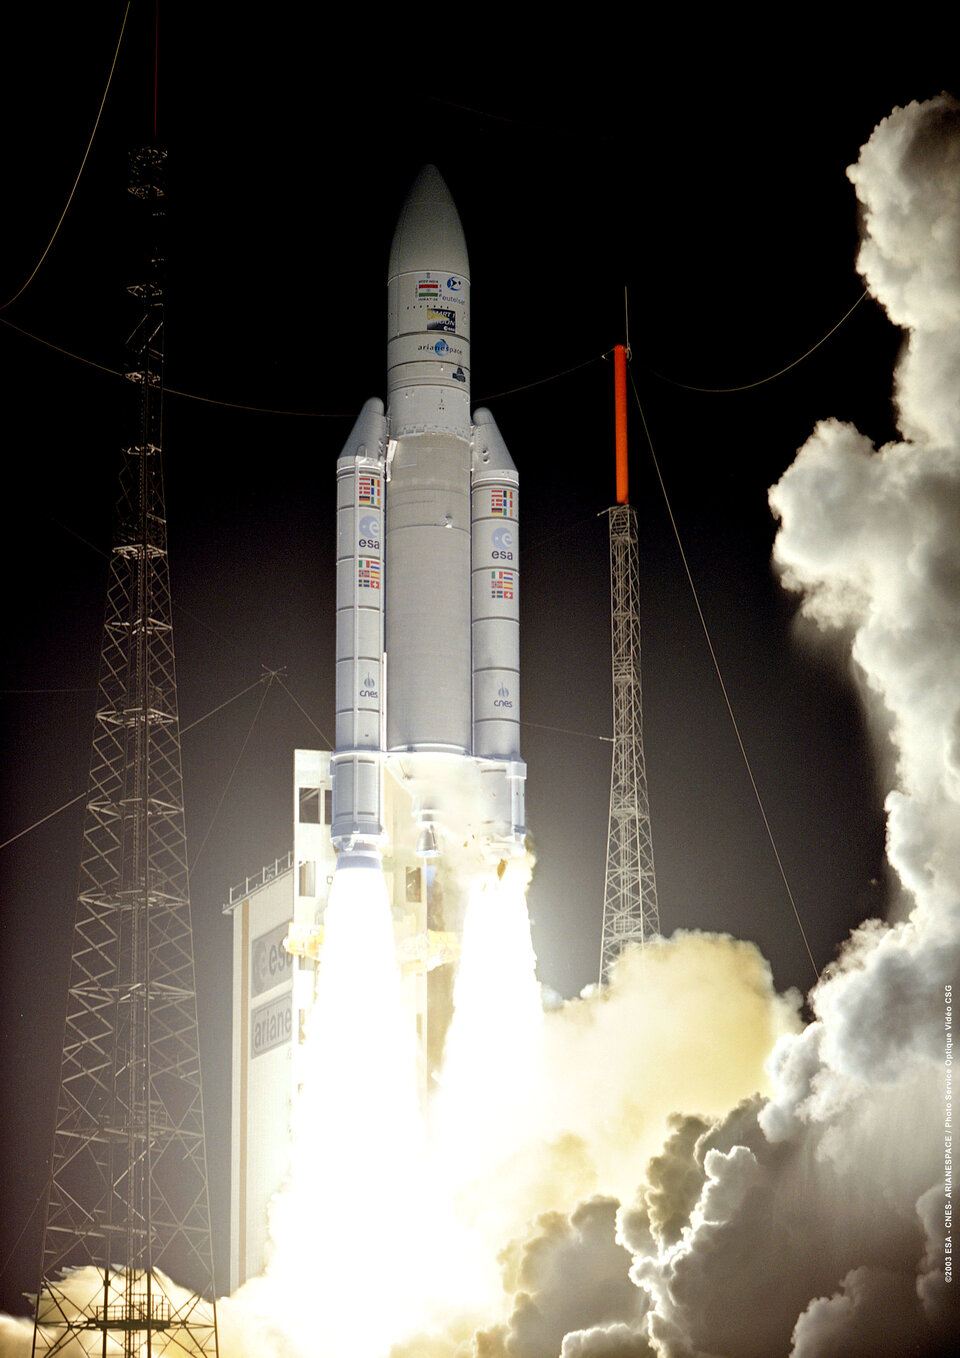 SMART-1 was launched on 27 September 2003